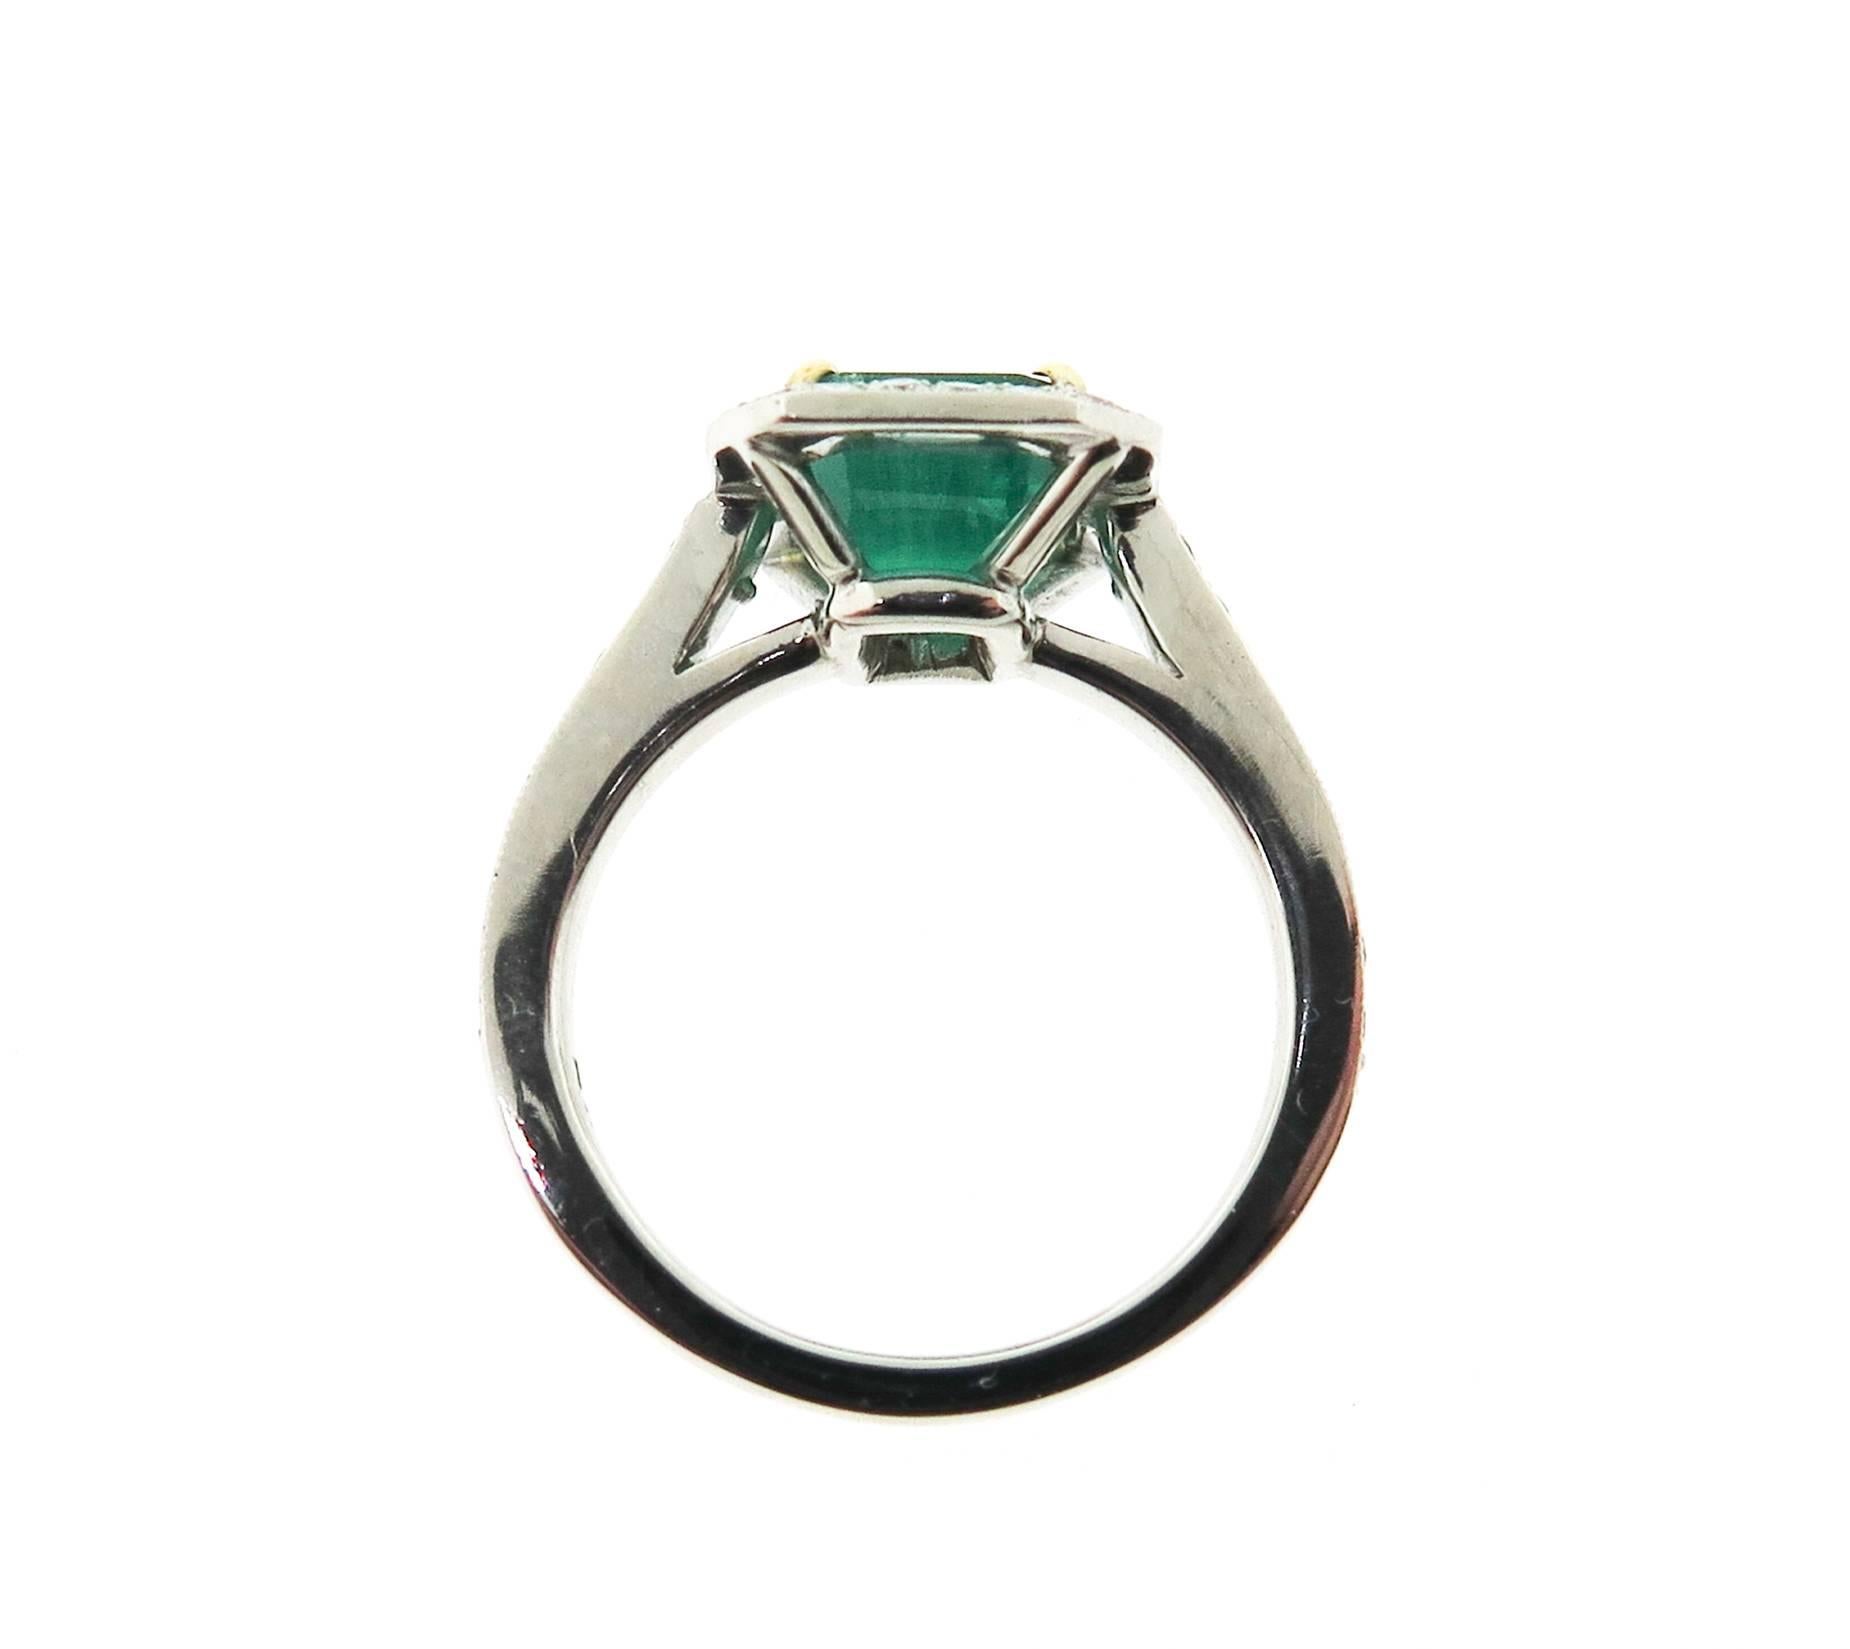 Amazing Emerald & Diamond Ring.
This gorgeous Emerald weights 3 ct. and surrounded by round brilliant cut white diamonds forming a halo with a total weight of 0.60 ct. Handcrafted in Platinum. Finger size 6.

